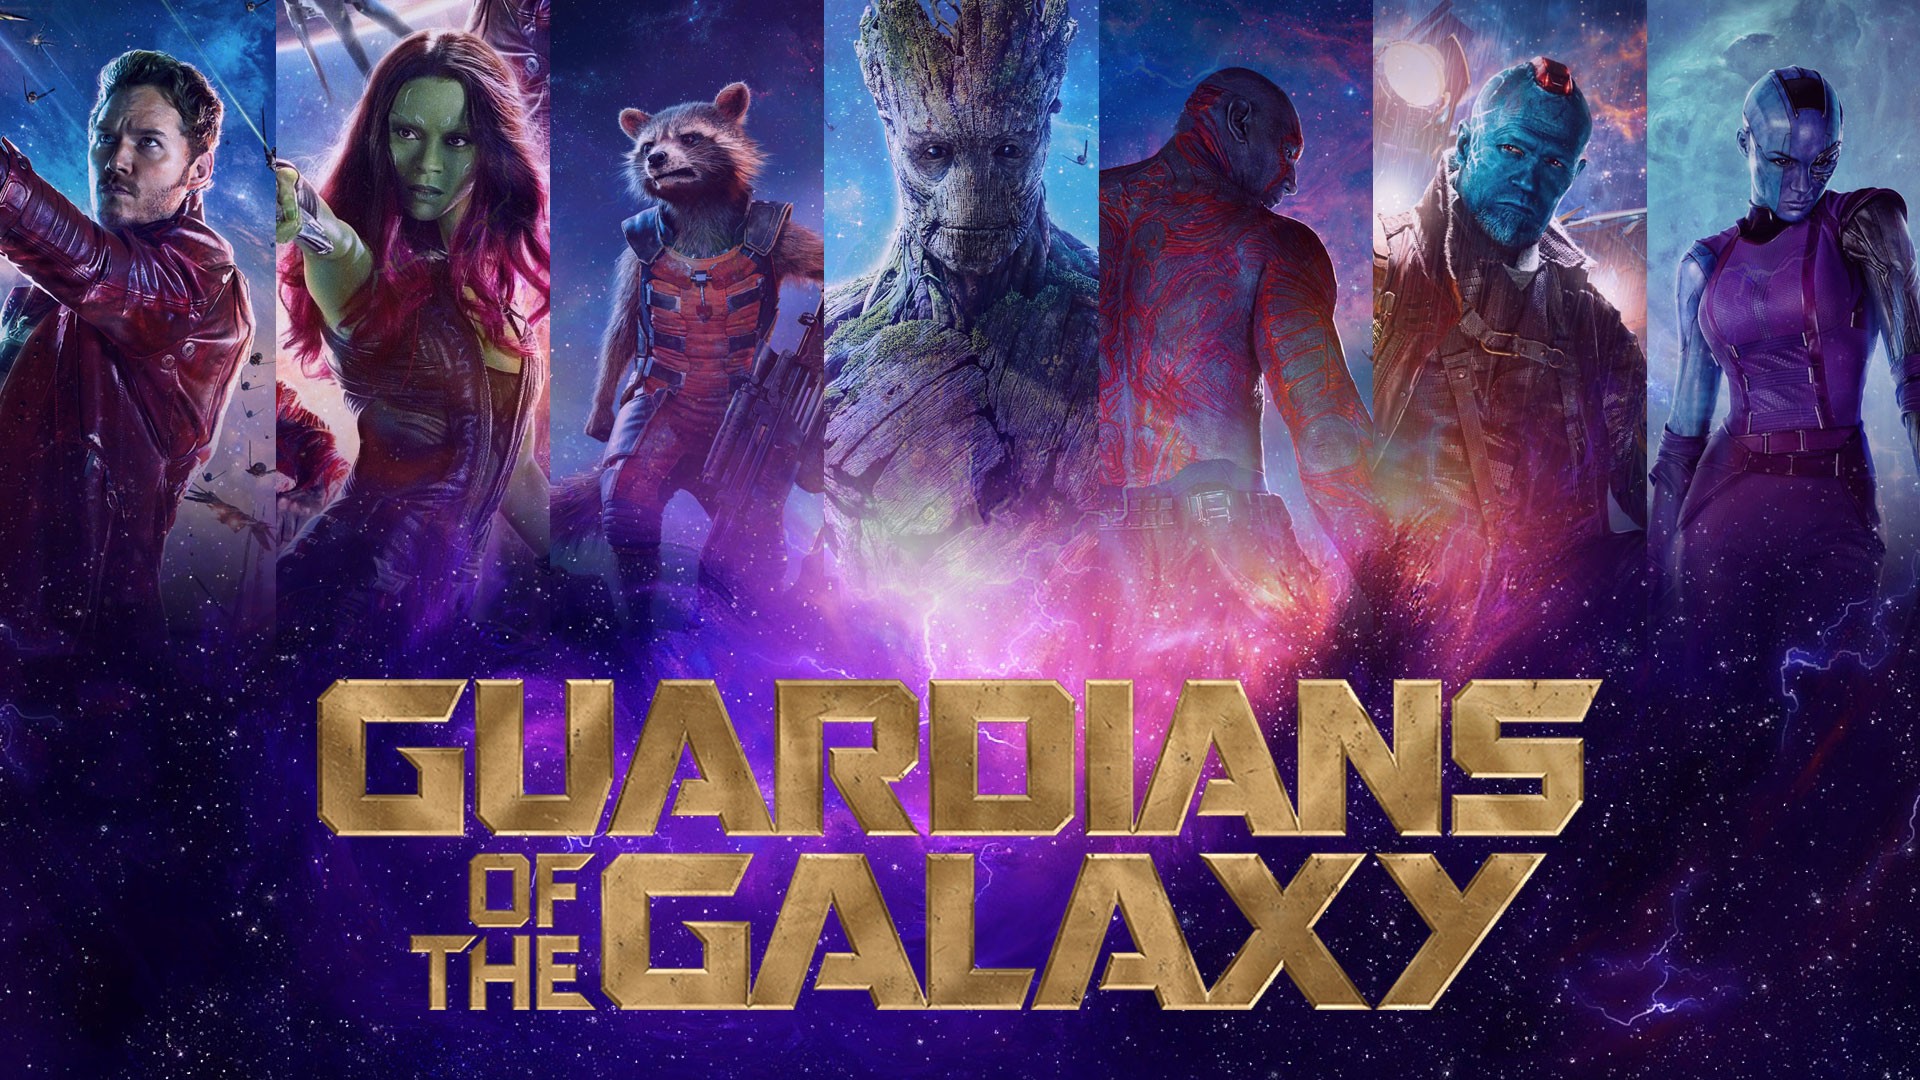 Wallpaper, nebula, Gamora, Guardians of the Galaxy, The Groot, Rocket Raccoon, Star Lord, Drax the Destroyer, Marvel Cinematic Universe, poster, Yondu Udonta, musical theatre, album cover 1920x1080